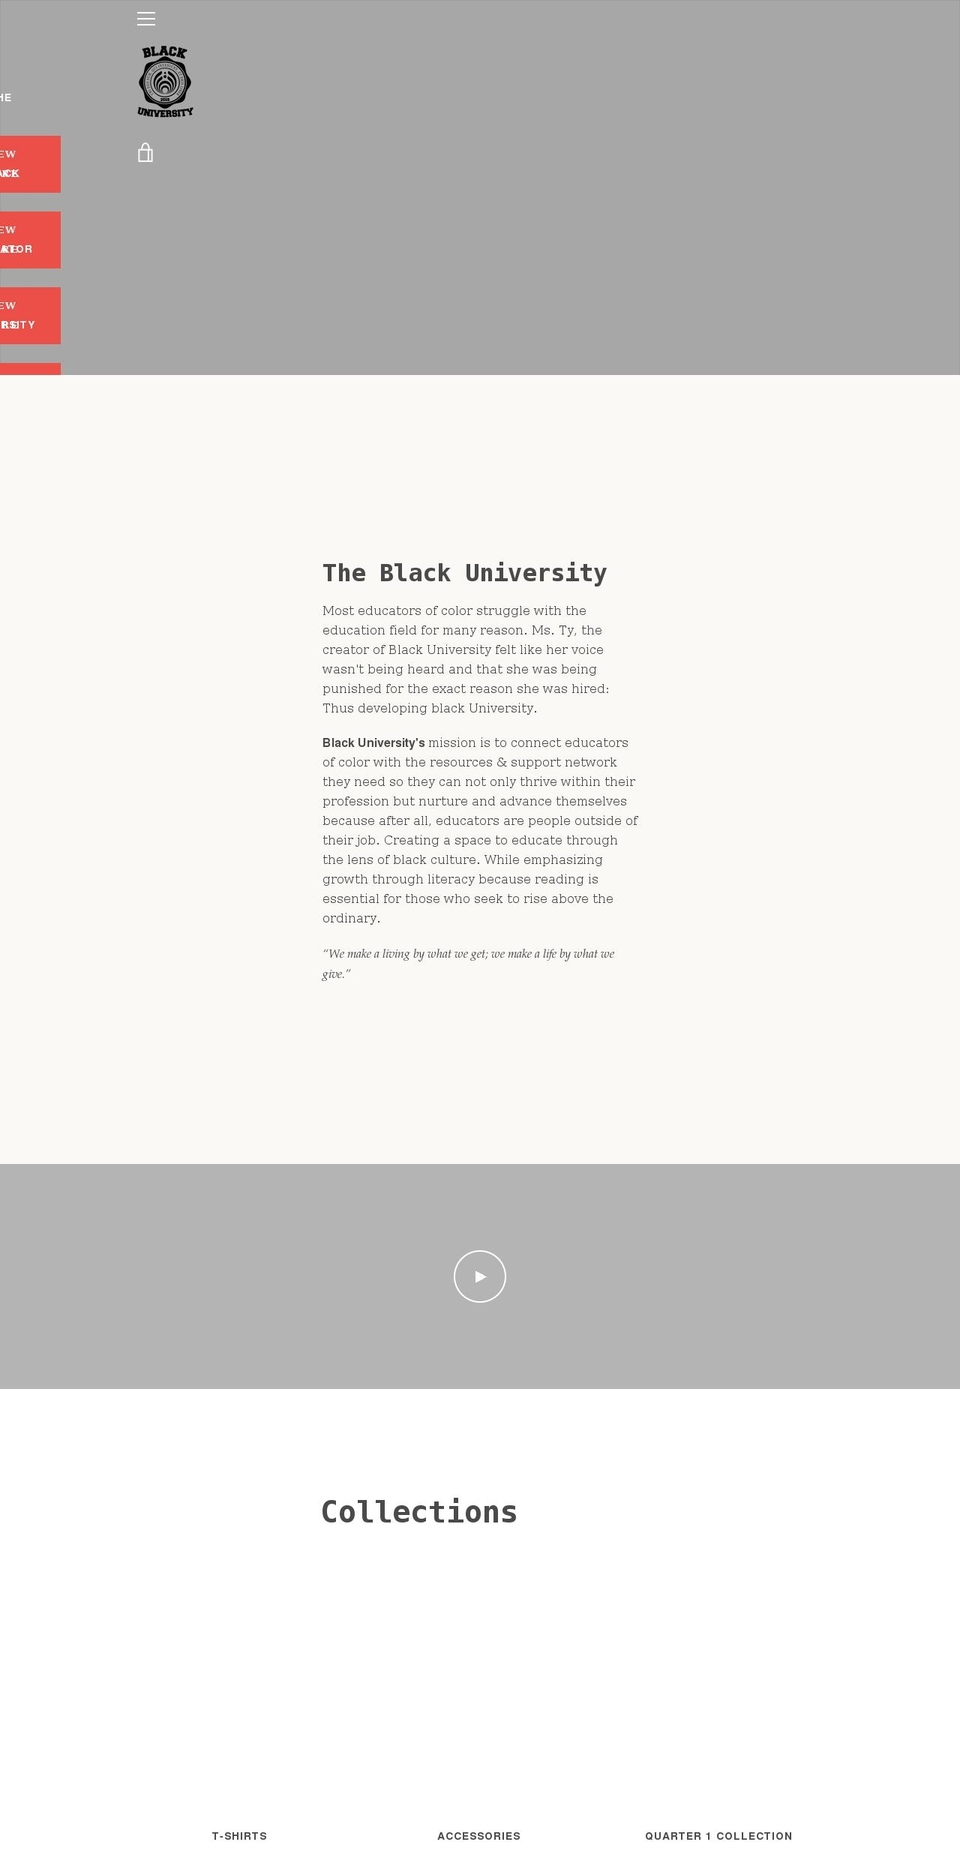 Narrative with Installments message Shopify theme site example blackuniversity.org